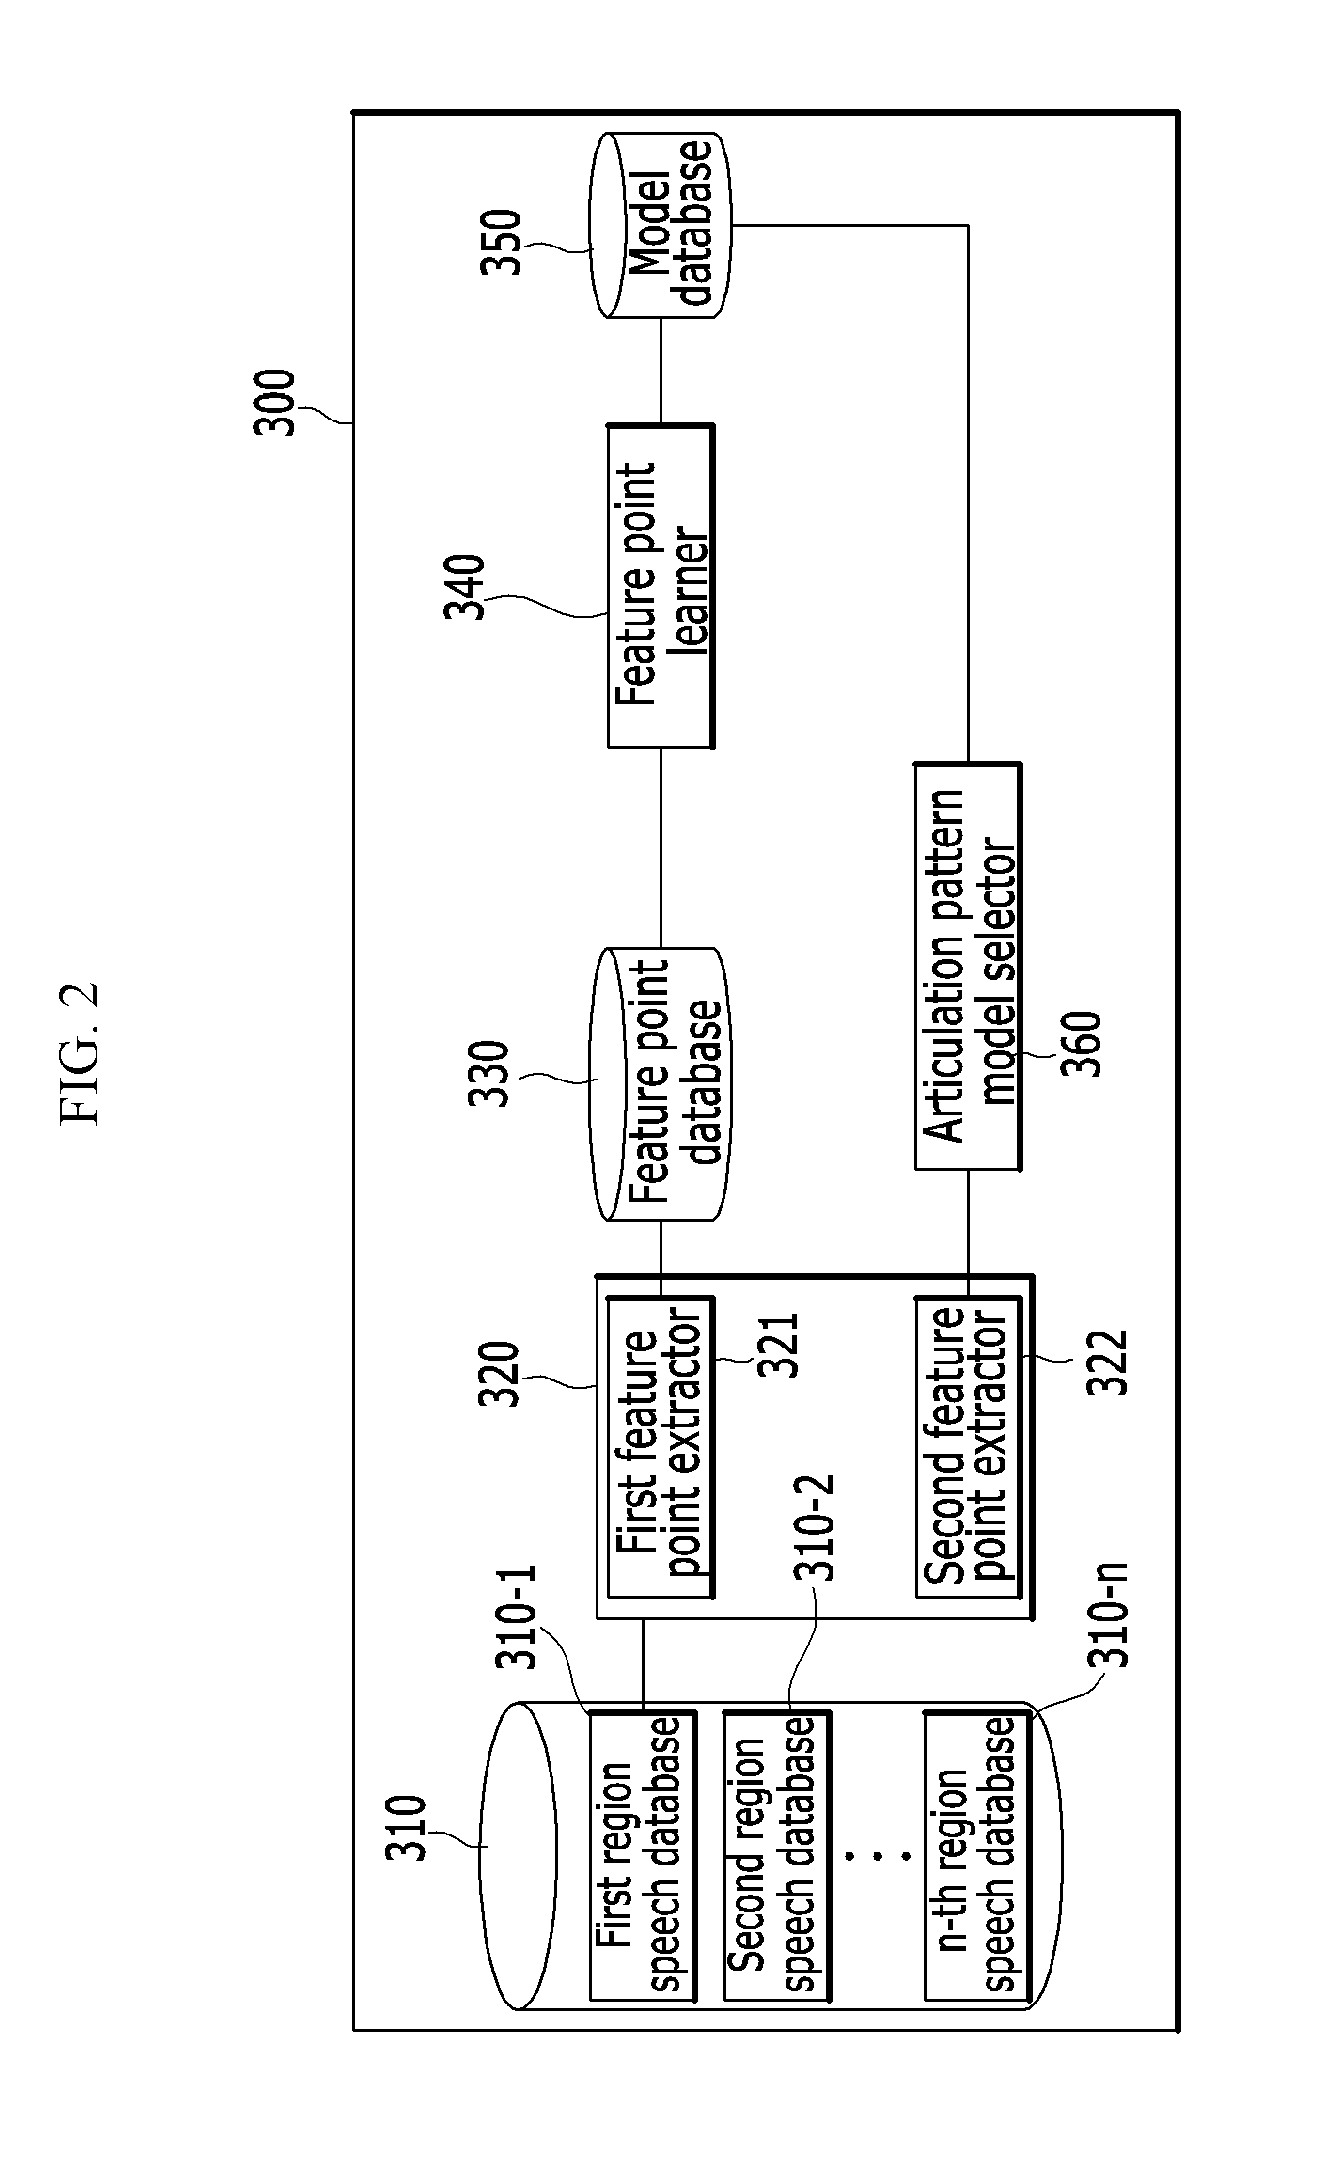 Speech recognition system and speech recognition method